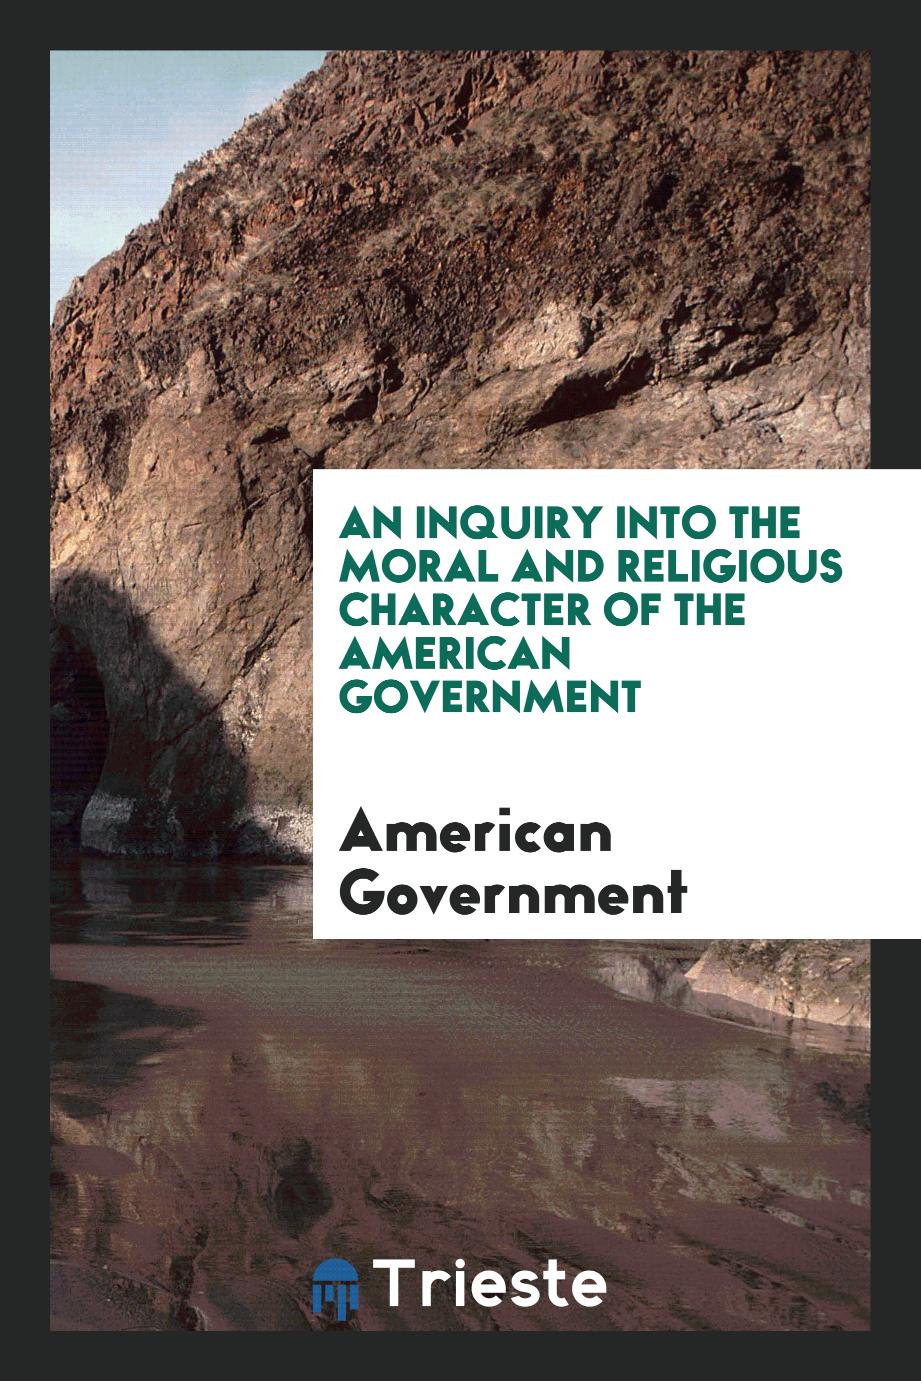 An Inquiry into the Moral and Religious Character of the American Government